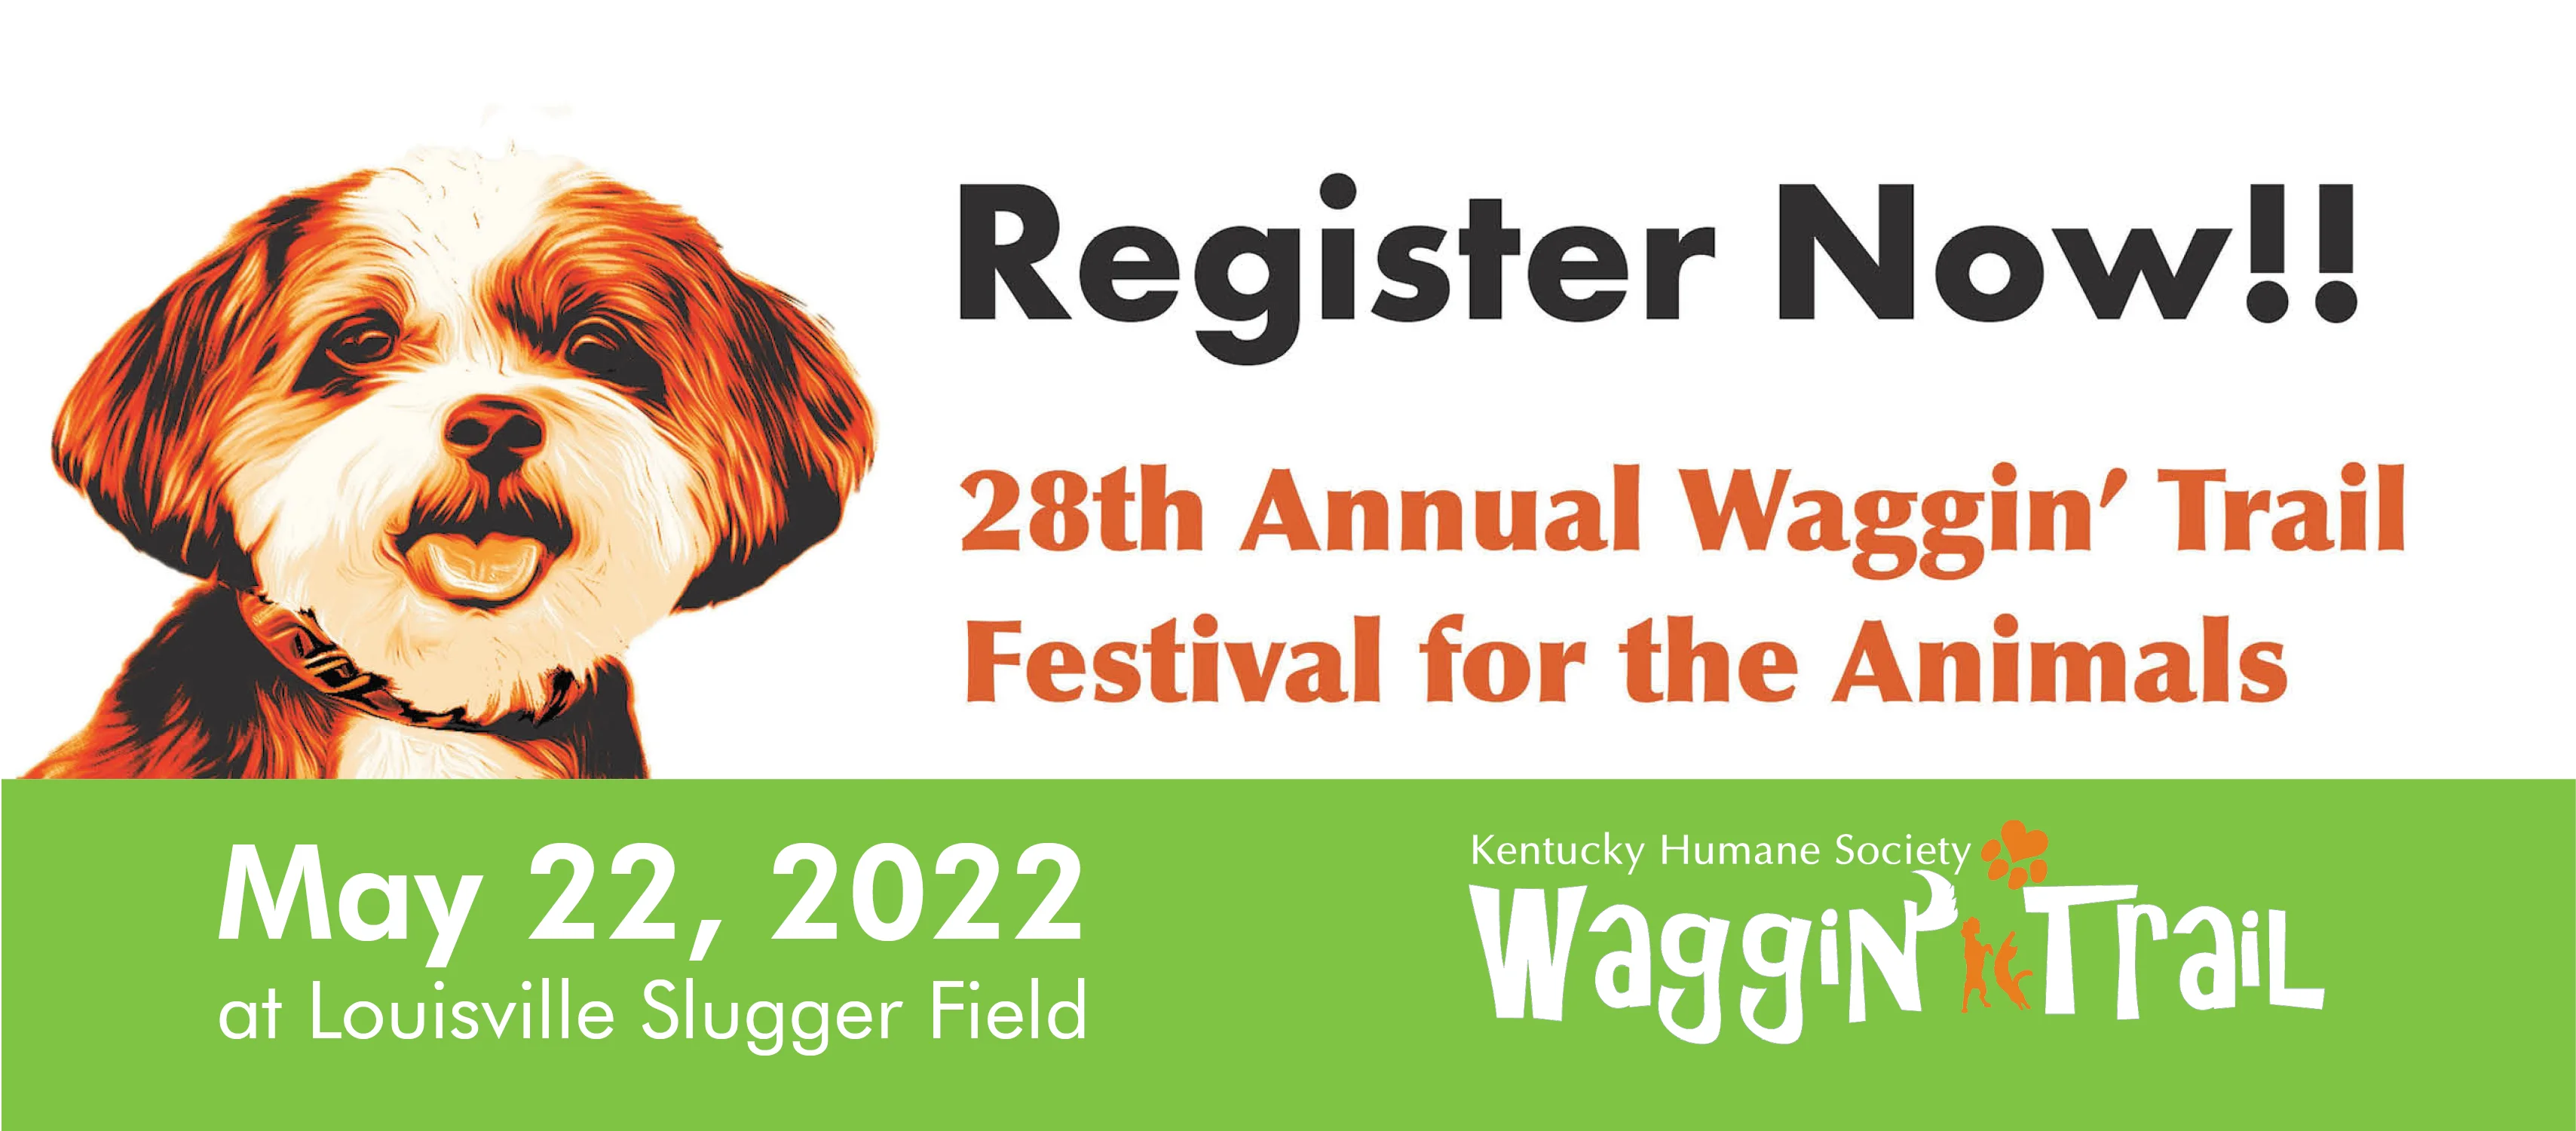 Waggin' Trail Festival for the Animals